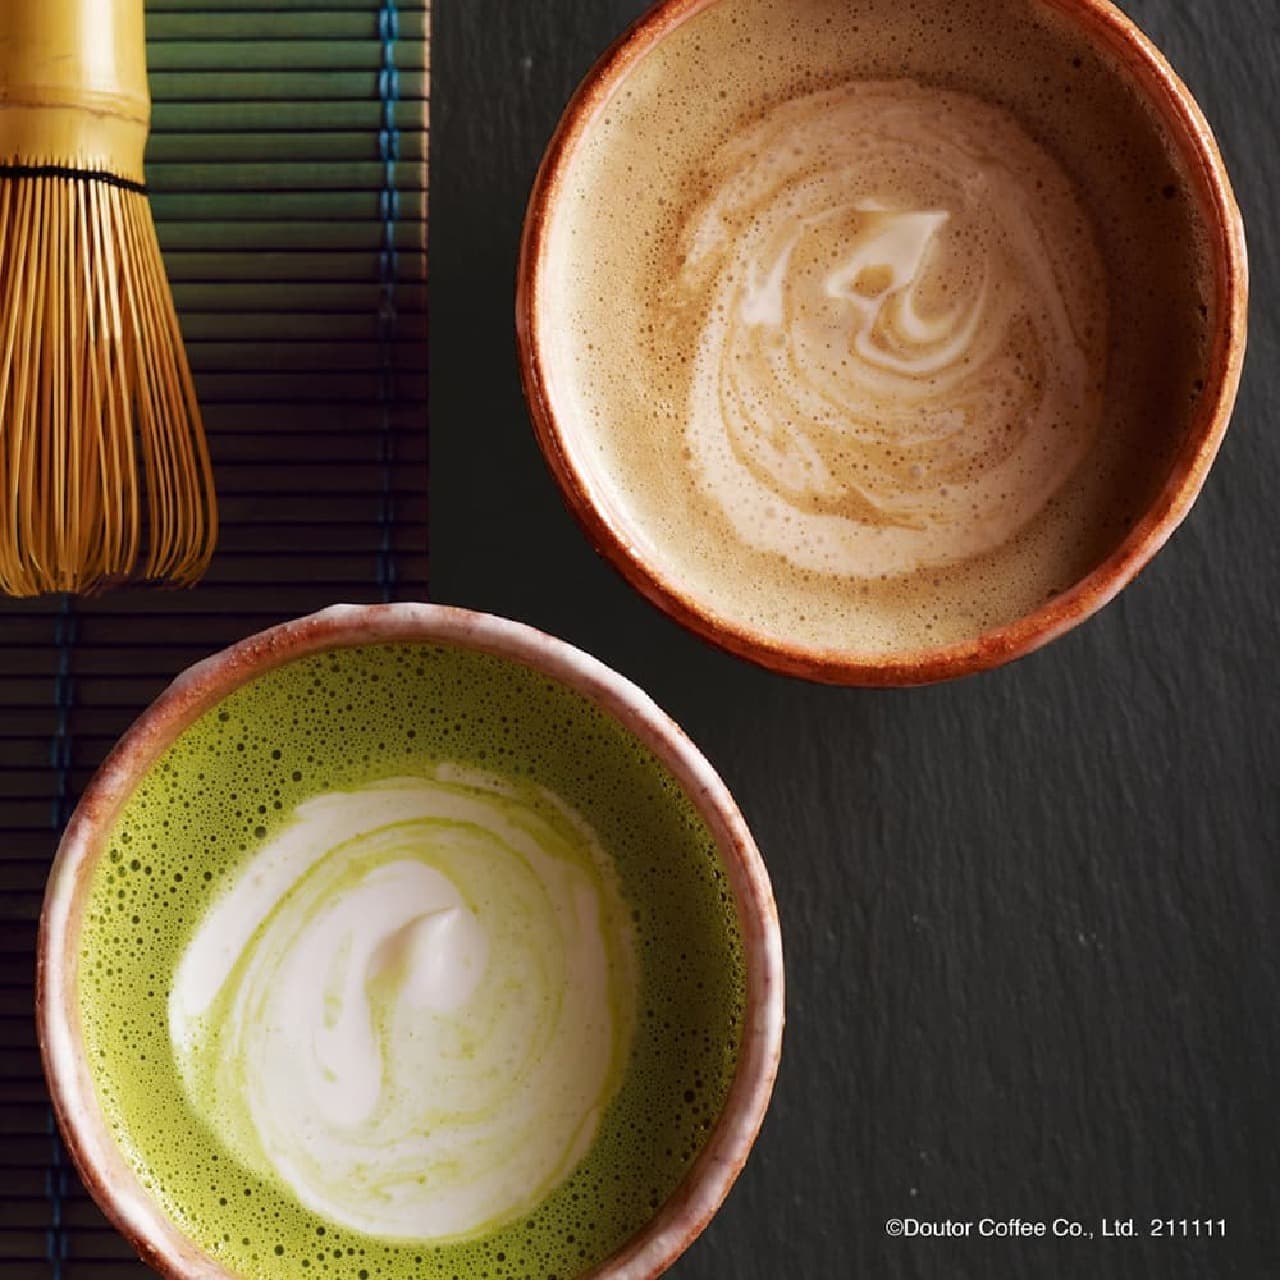 Doutor "Luxury matcha latte using the best tea from Kyoto Prefecture"